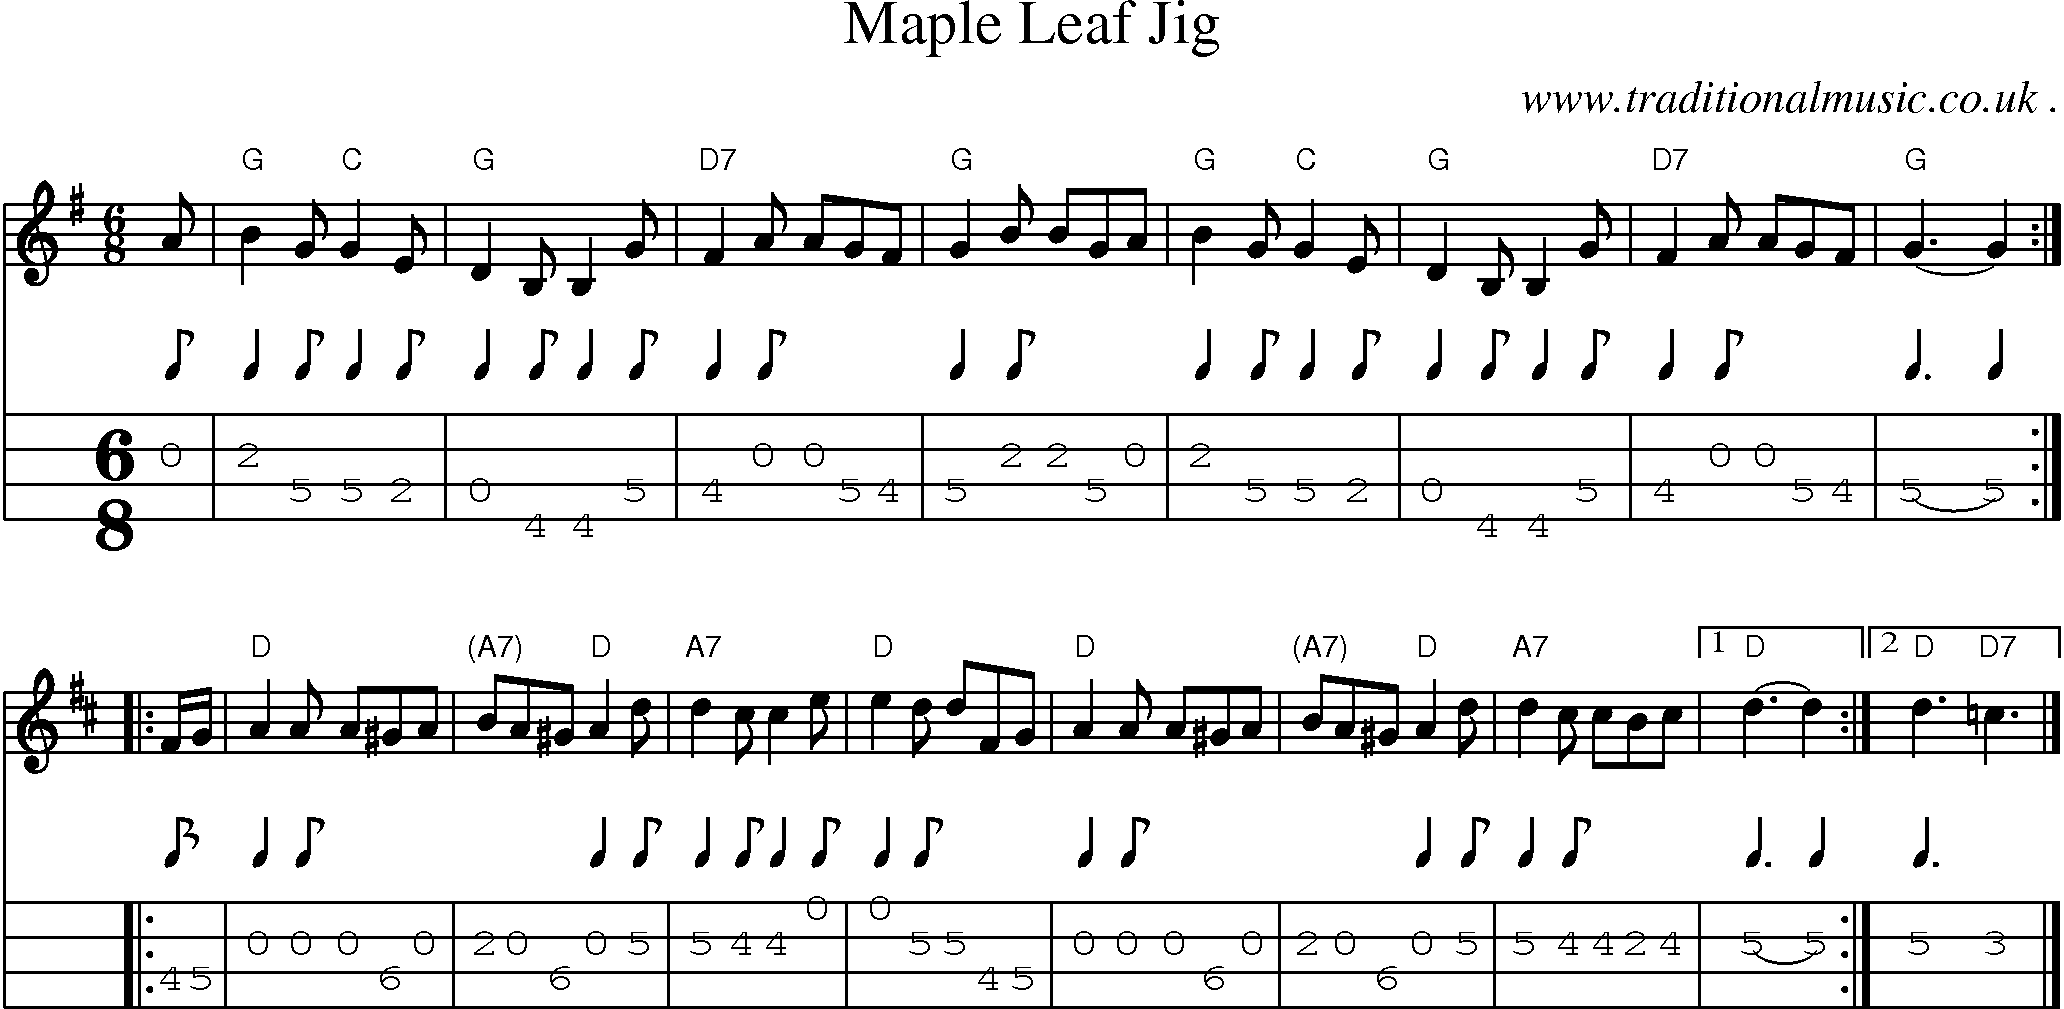 Sheet-music  score, Chords and Mandolin Tabs for Maple Leaf Jig